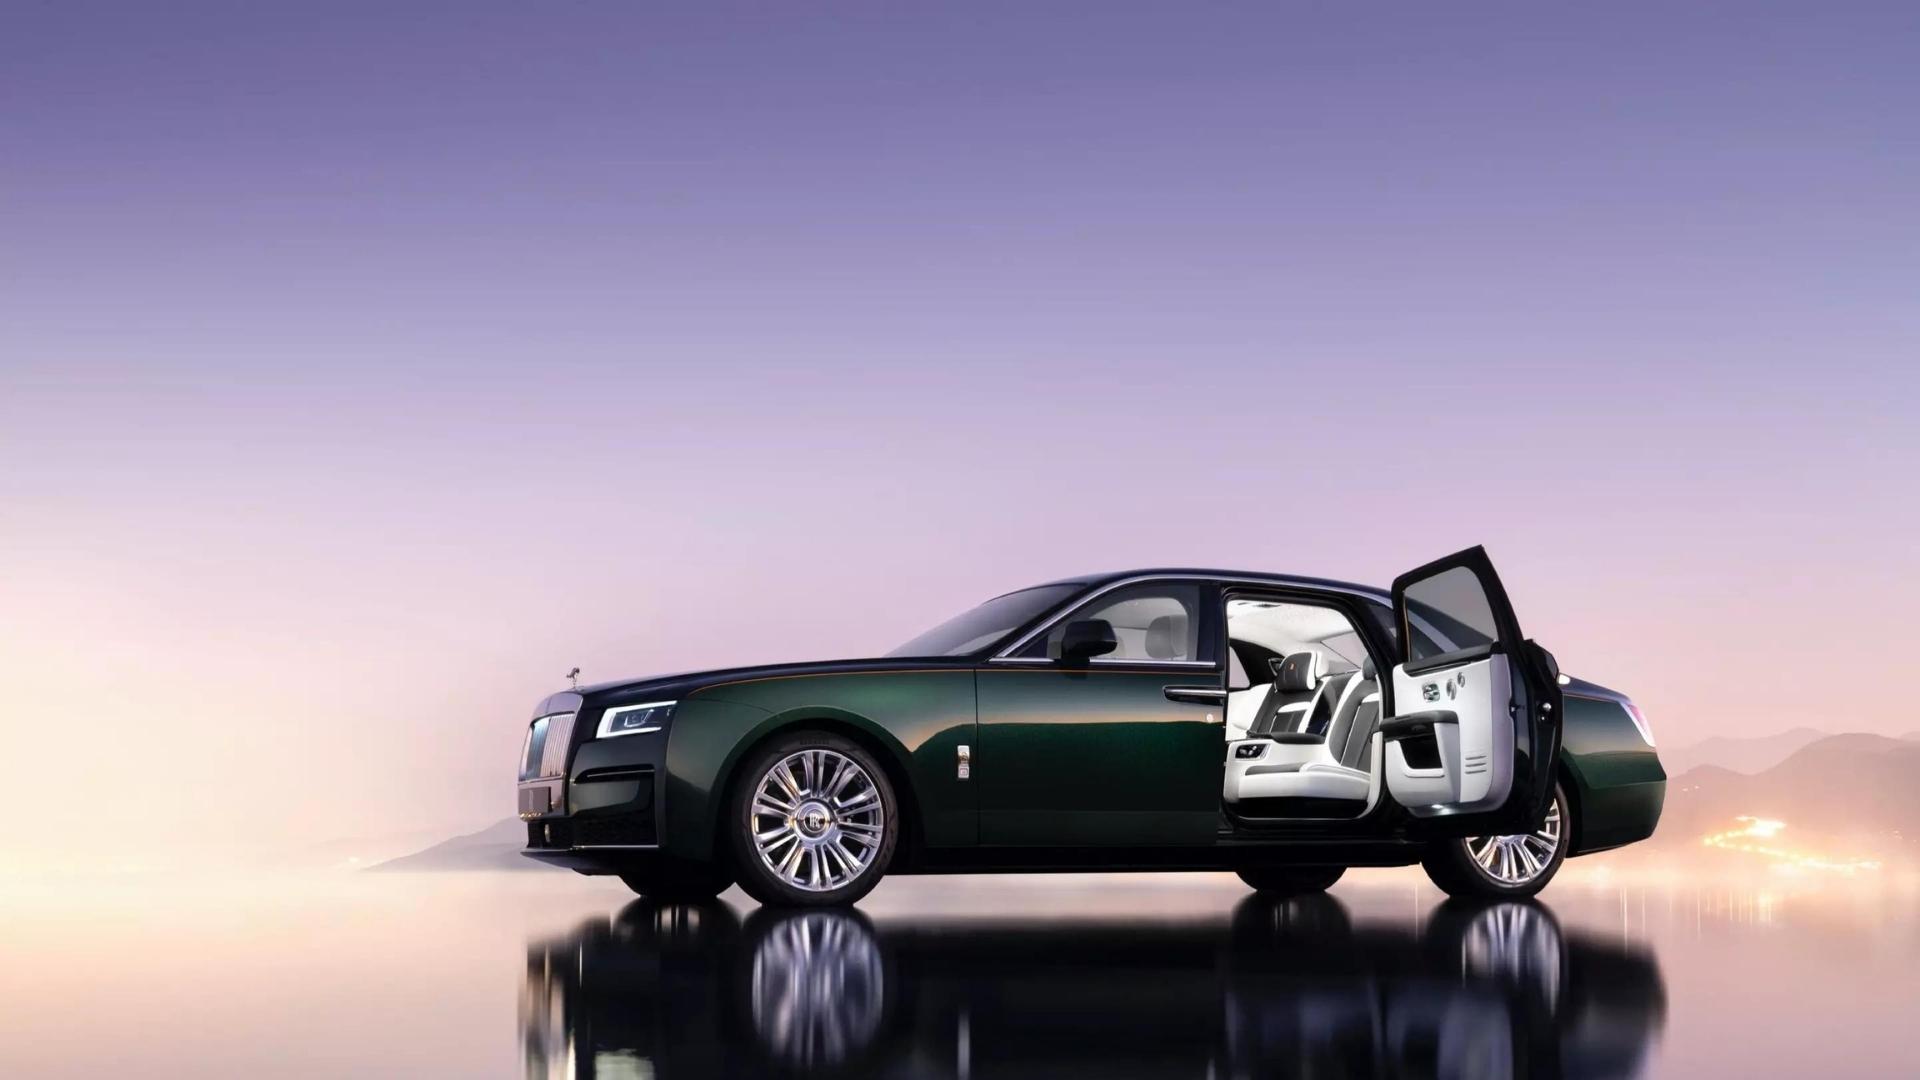 These Vehicles Give You the Most Luxurious Back-Seat Experience Ever